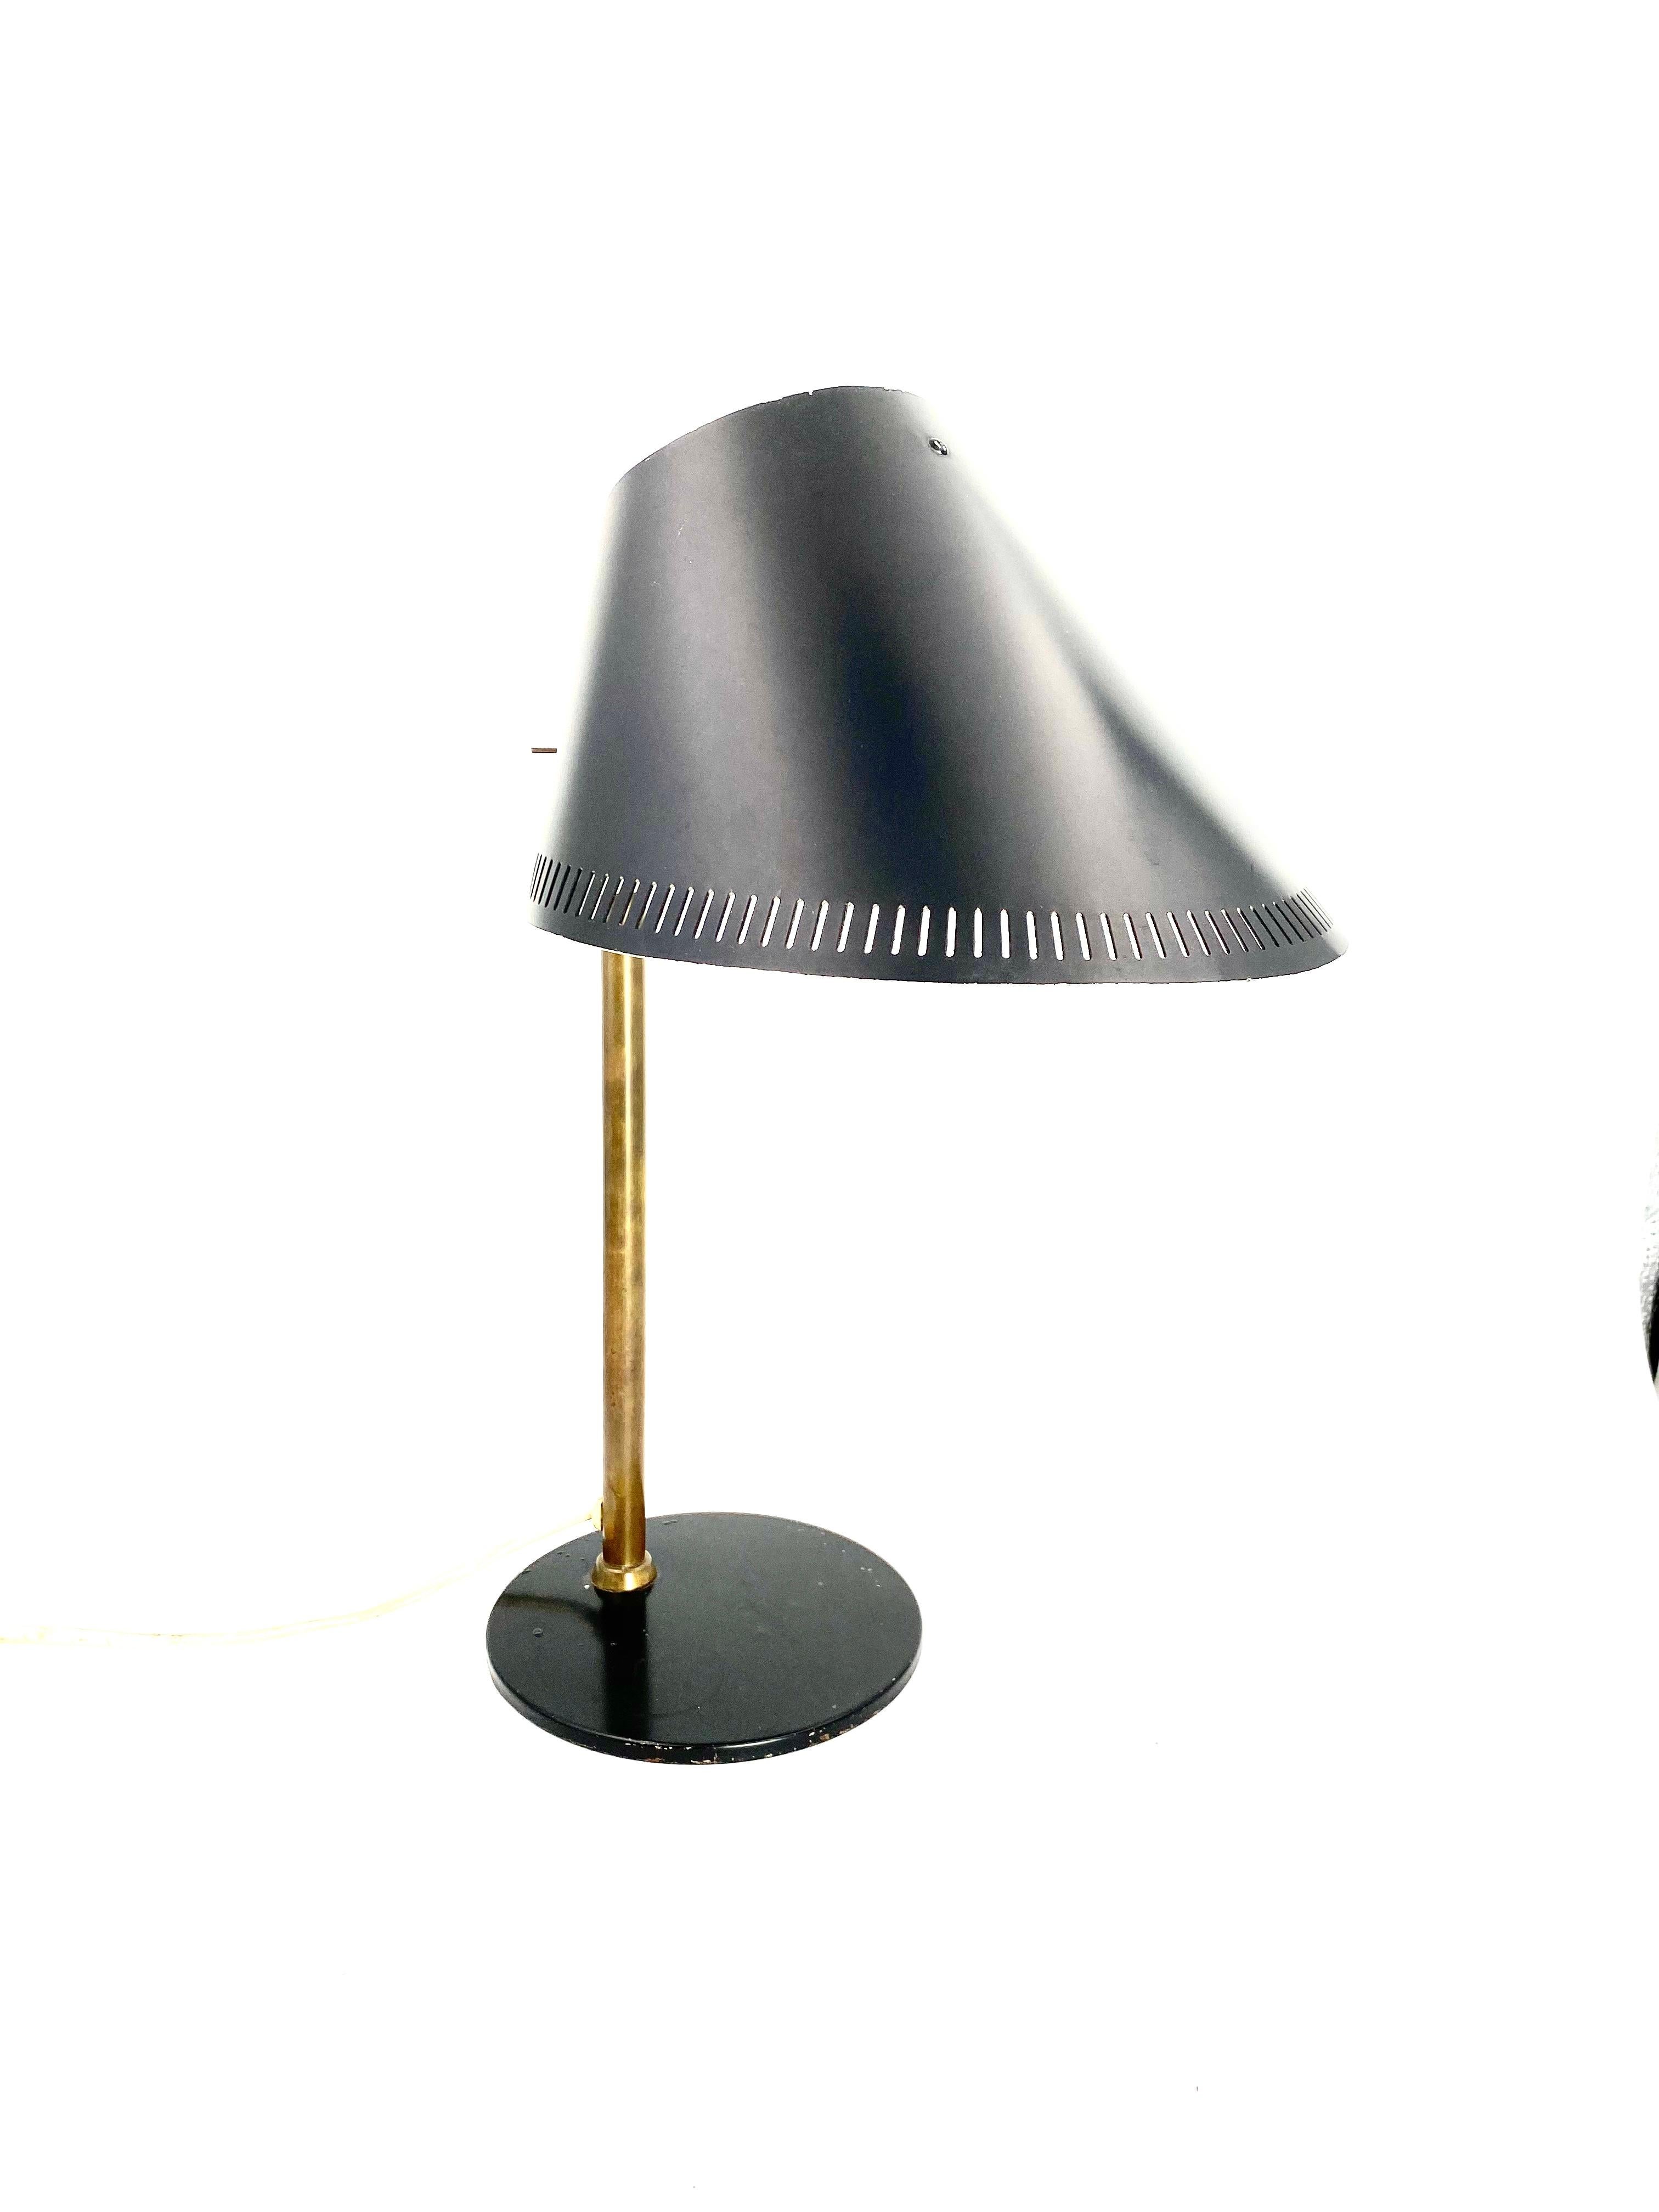 Finnish Paavo Tynell Rare Table Lamp Mod. 9227, by Taito E Idman, Finland, 1958 For Sale